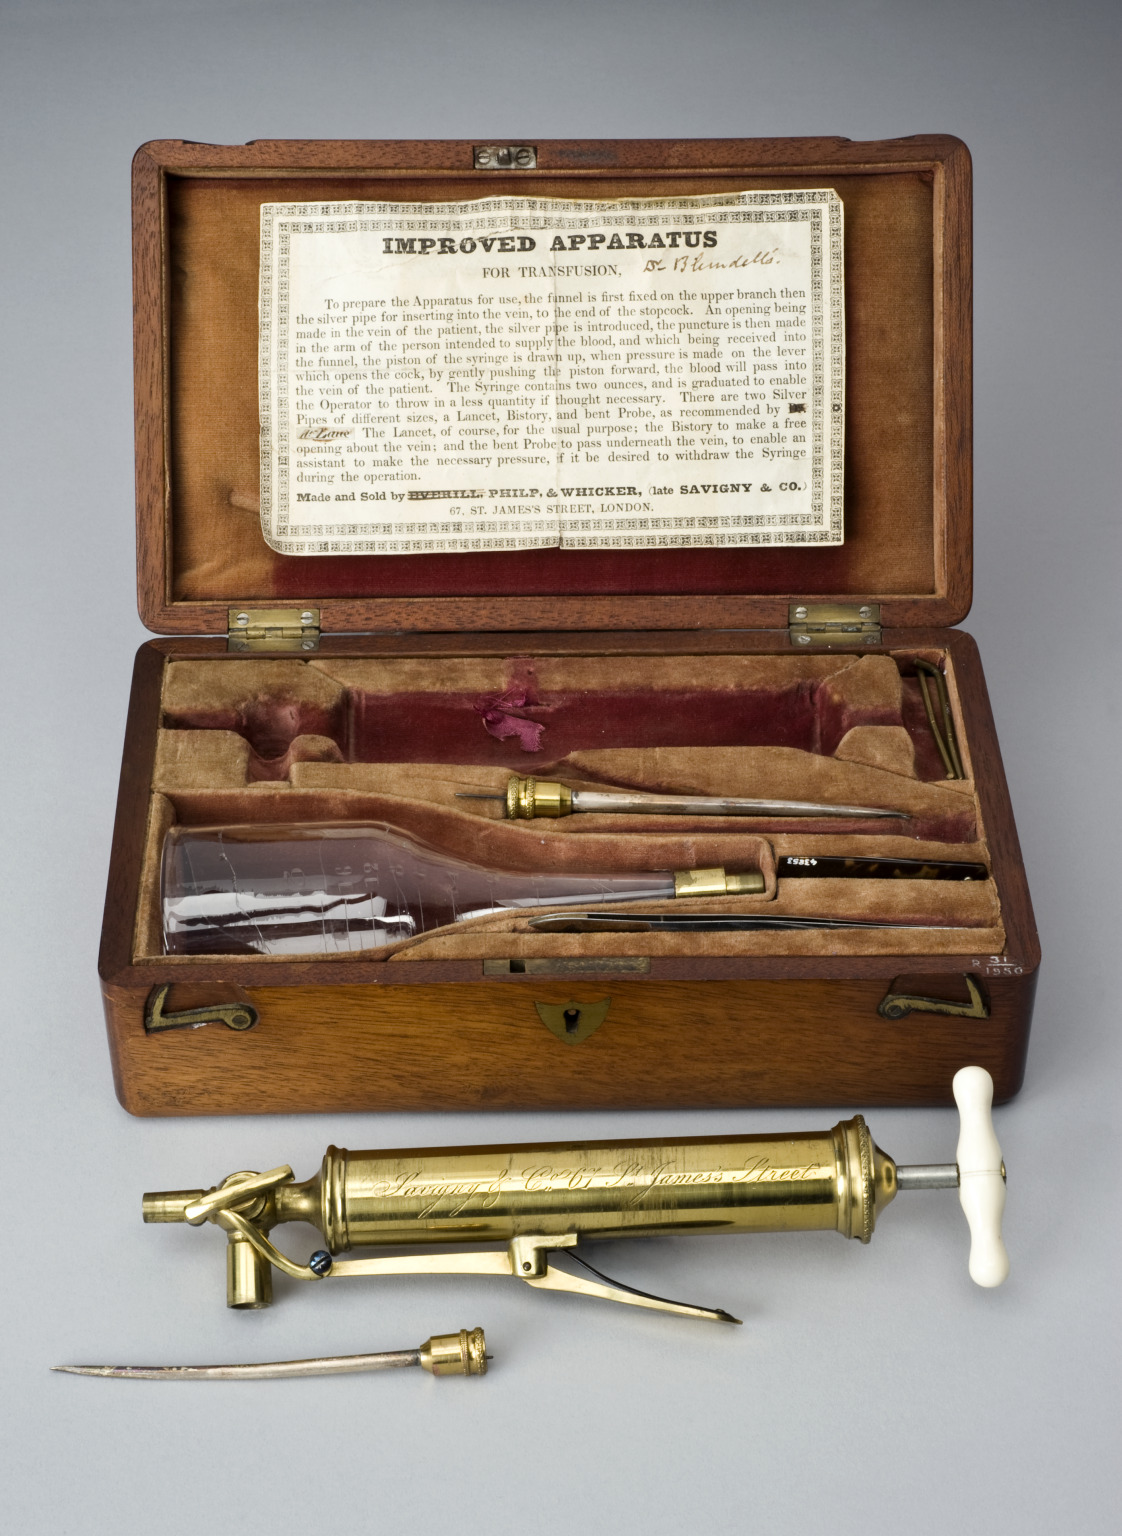 acrosscenturiesandgenerations:  ▪Blundell’s blood transfusion apparatus. Place of origin:  London, EnglandDate: 1801-1900• James Blundell (1790-1878) was a British obstetrician. He performed the first recorded successful human-to-human blood transfusion